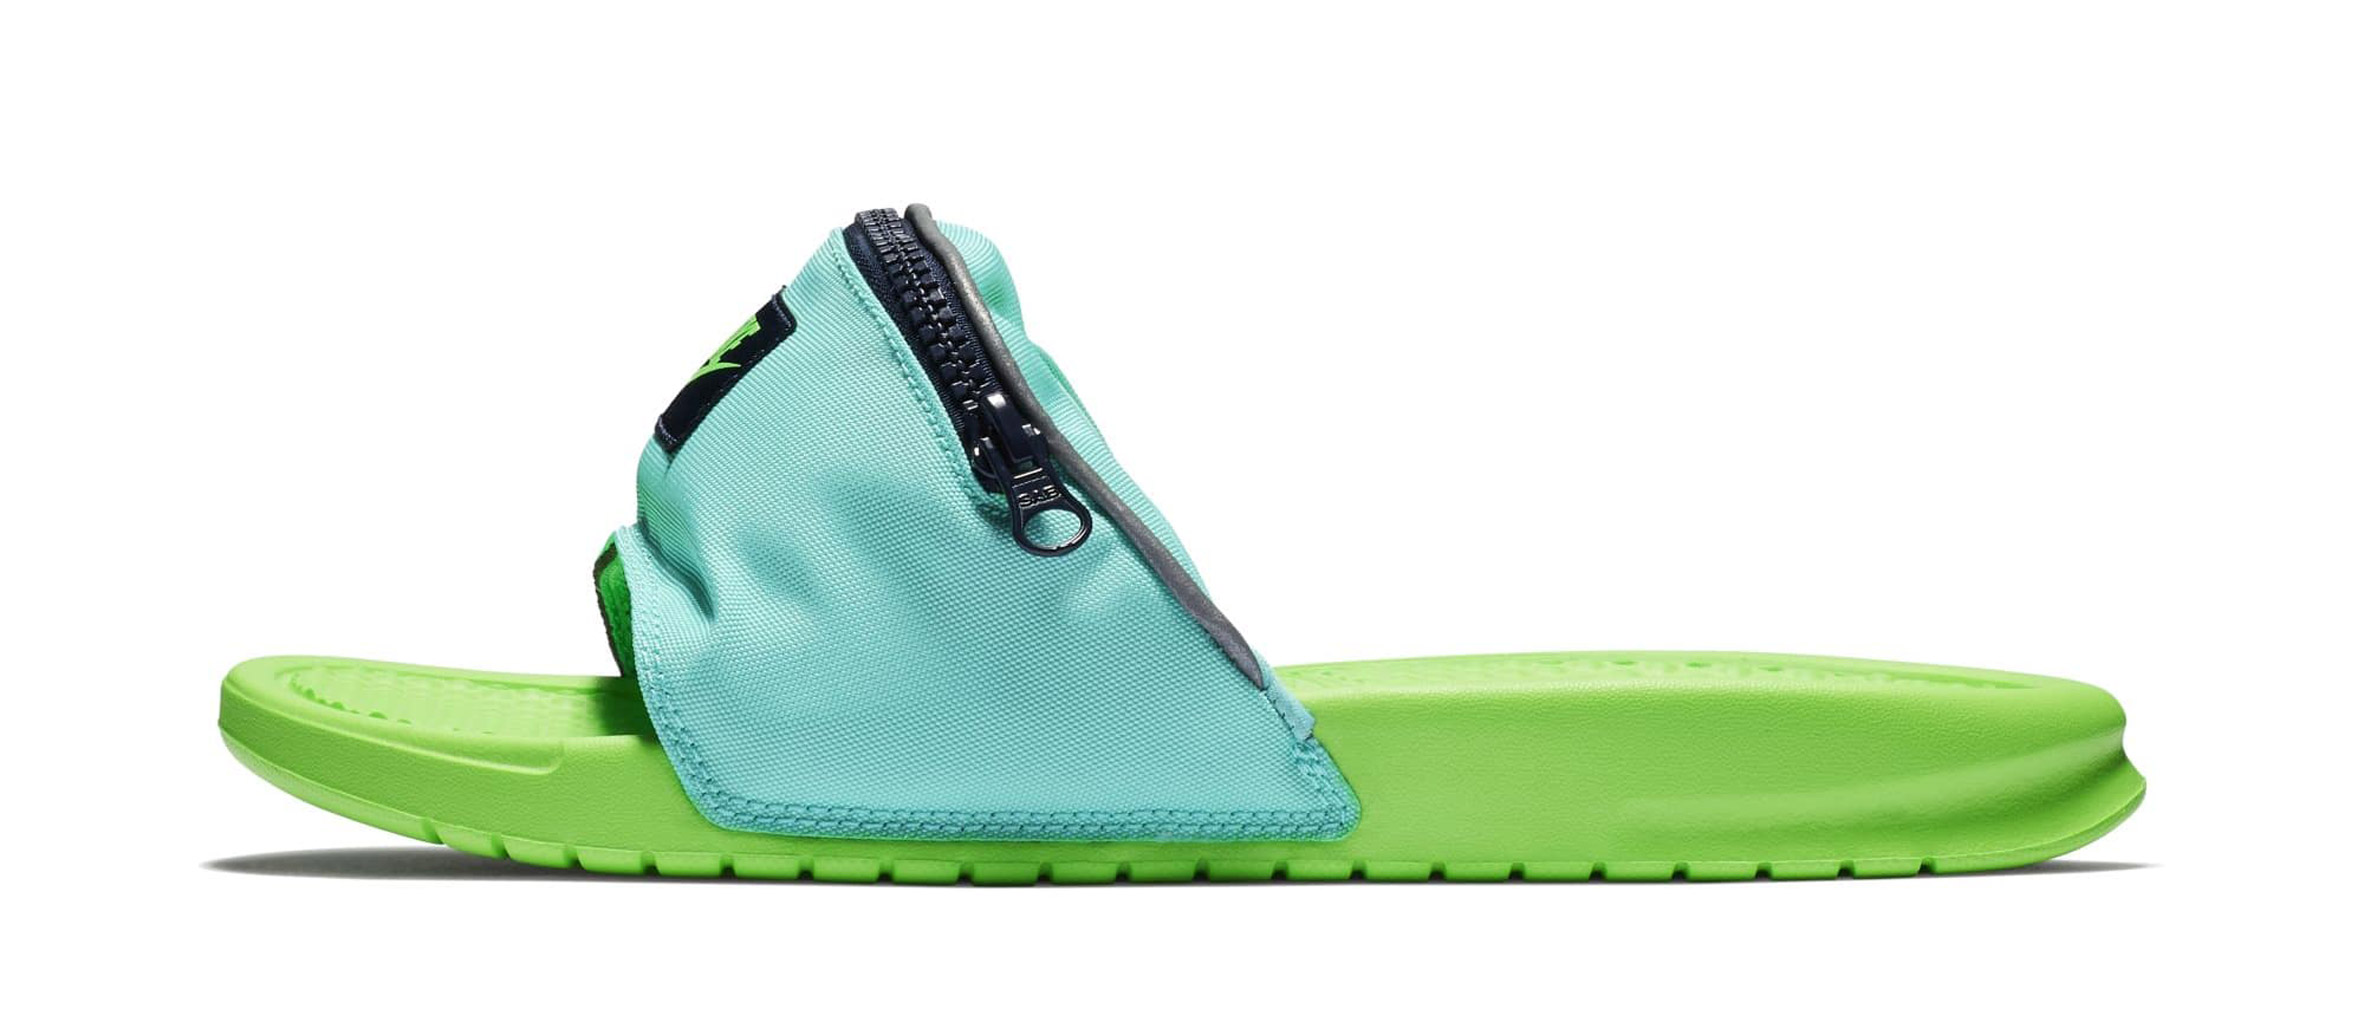 Fanny Pack sliders by Nike